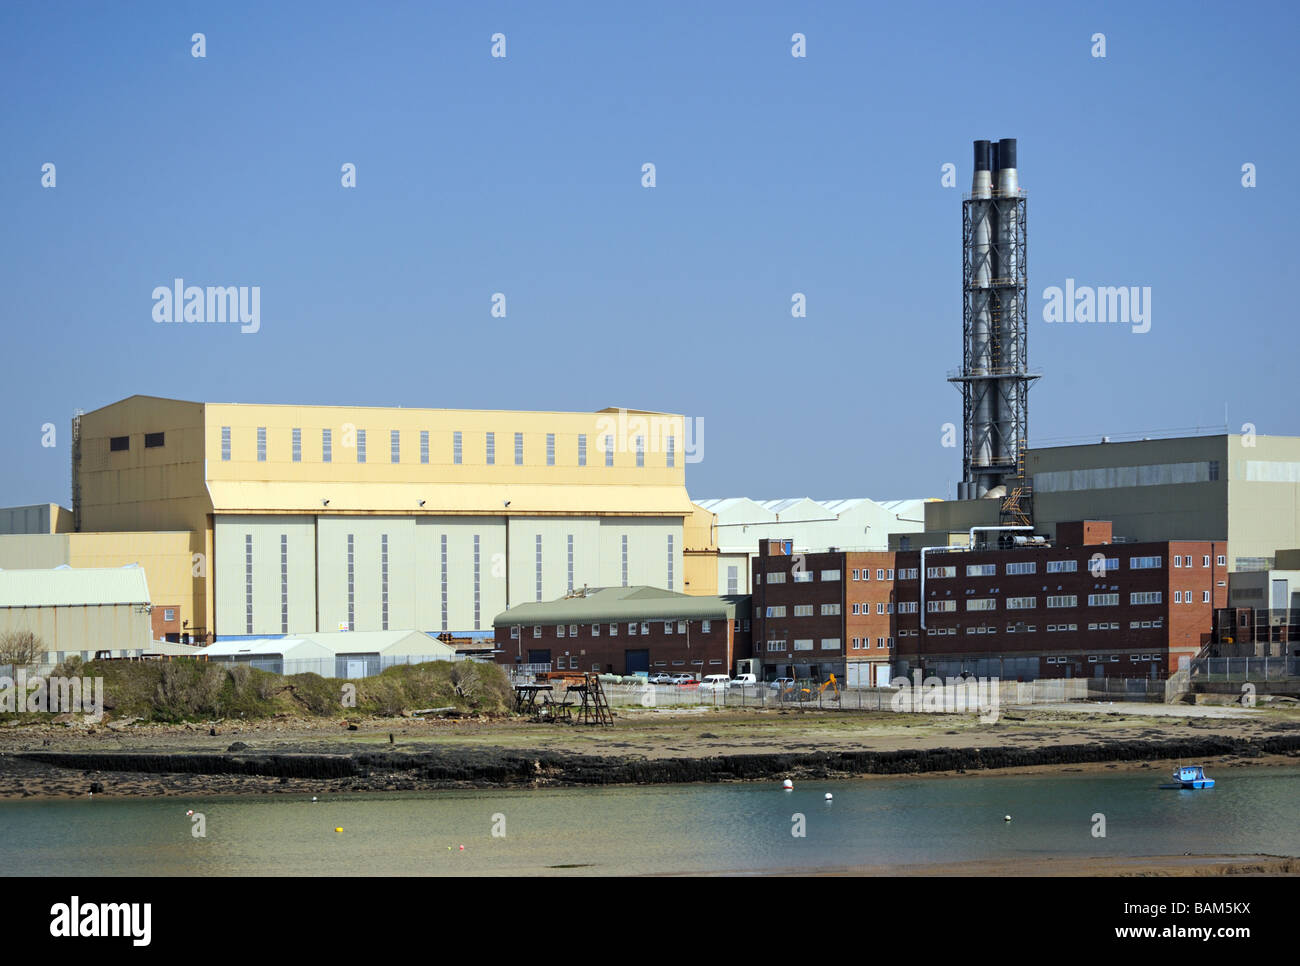 Walney Channel and BAE Systems buildings. Barrow-in-Furness, Cumbria, England, United Kingdom, Europe. Stock Photo